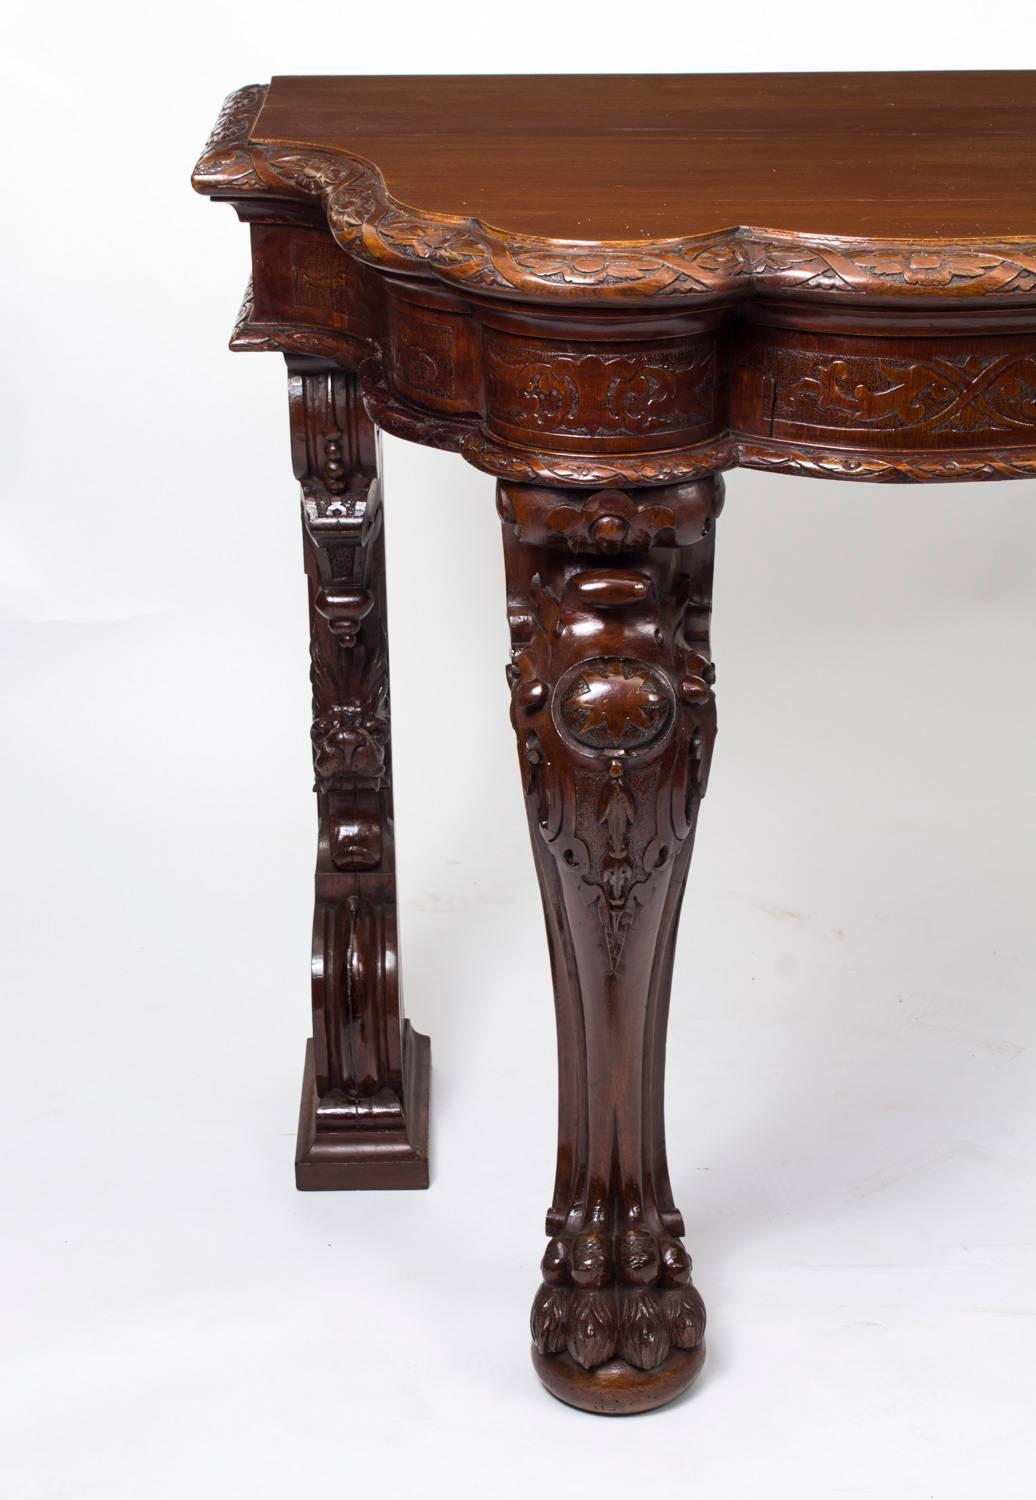 This is a superb antique Victorian mahogany serving table, circa 1870 in date.

This stunning serving table is made from solid mahogany and has a beautiful hand-carved rosette and ribbon border, which is repeated on the frieze, with a central heavy